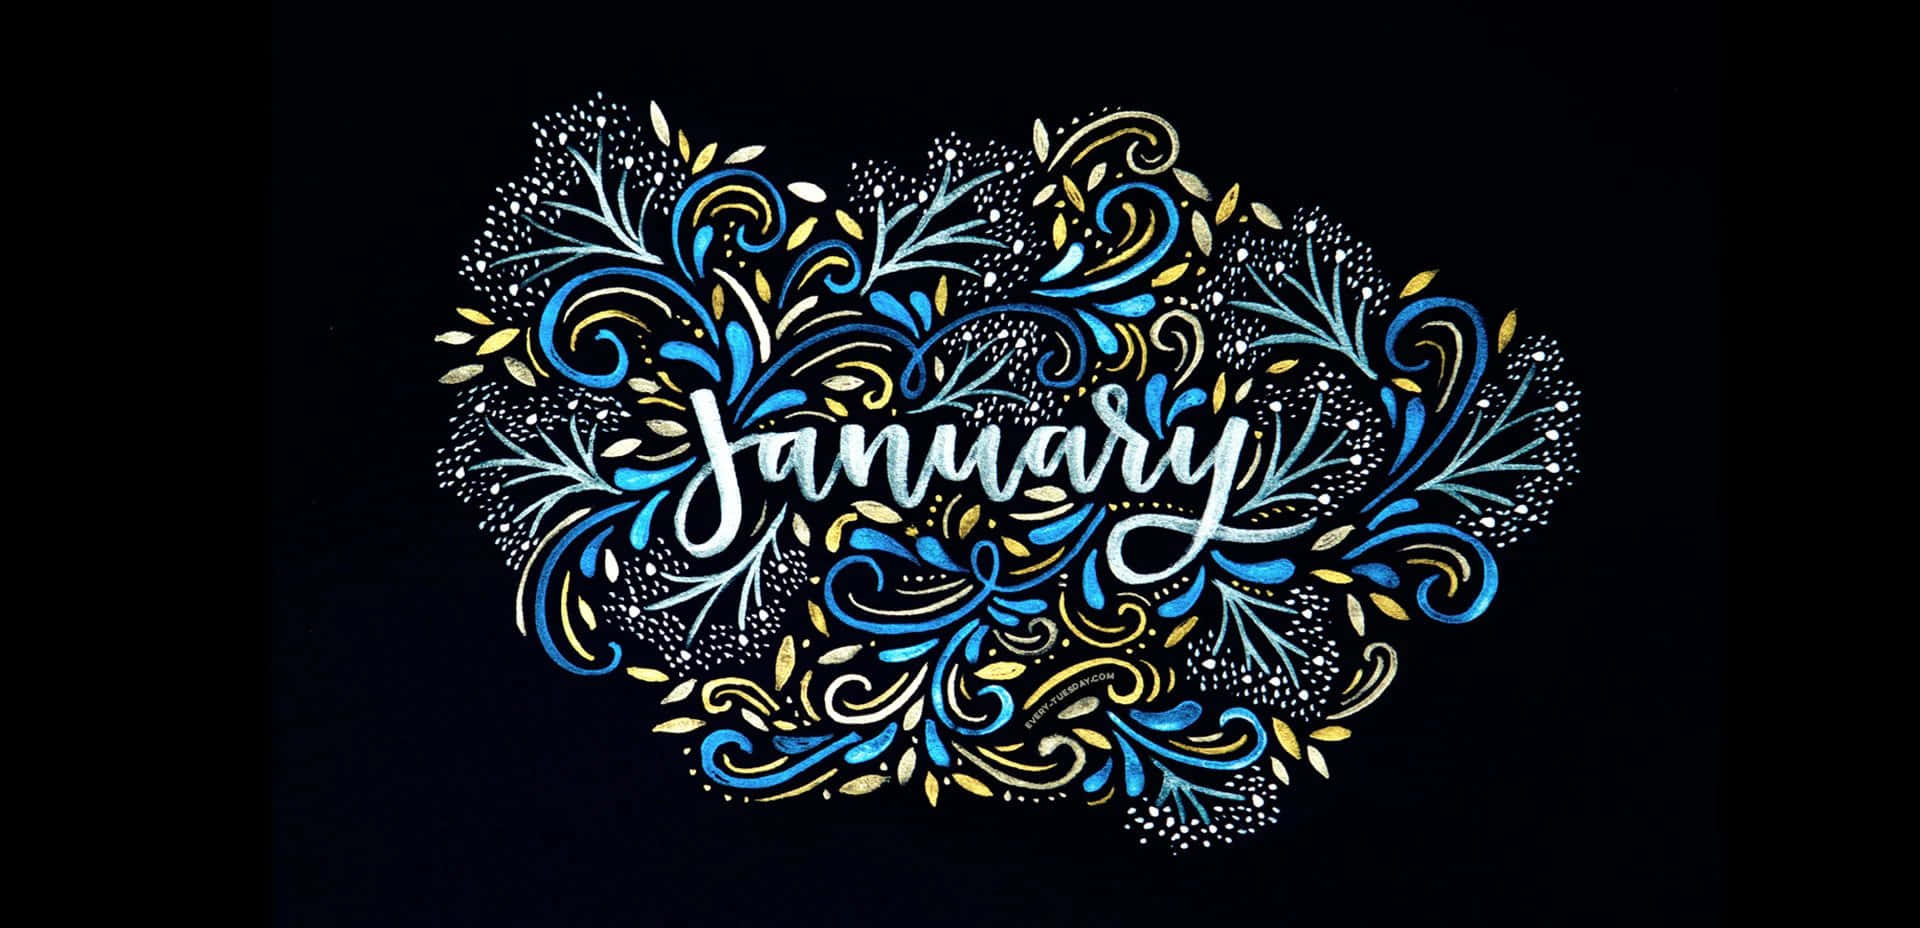 "Welcome to the new year with this sweet January scene!" Wallpaper